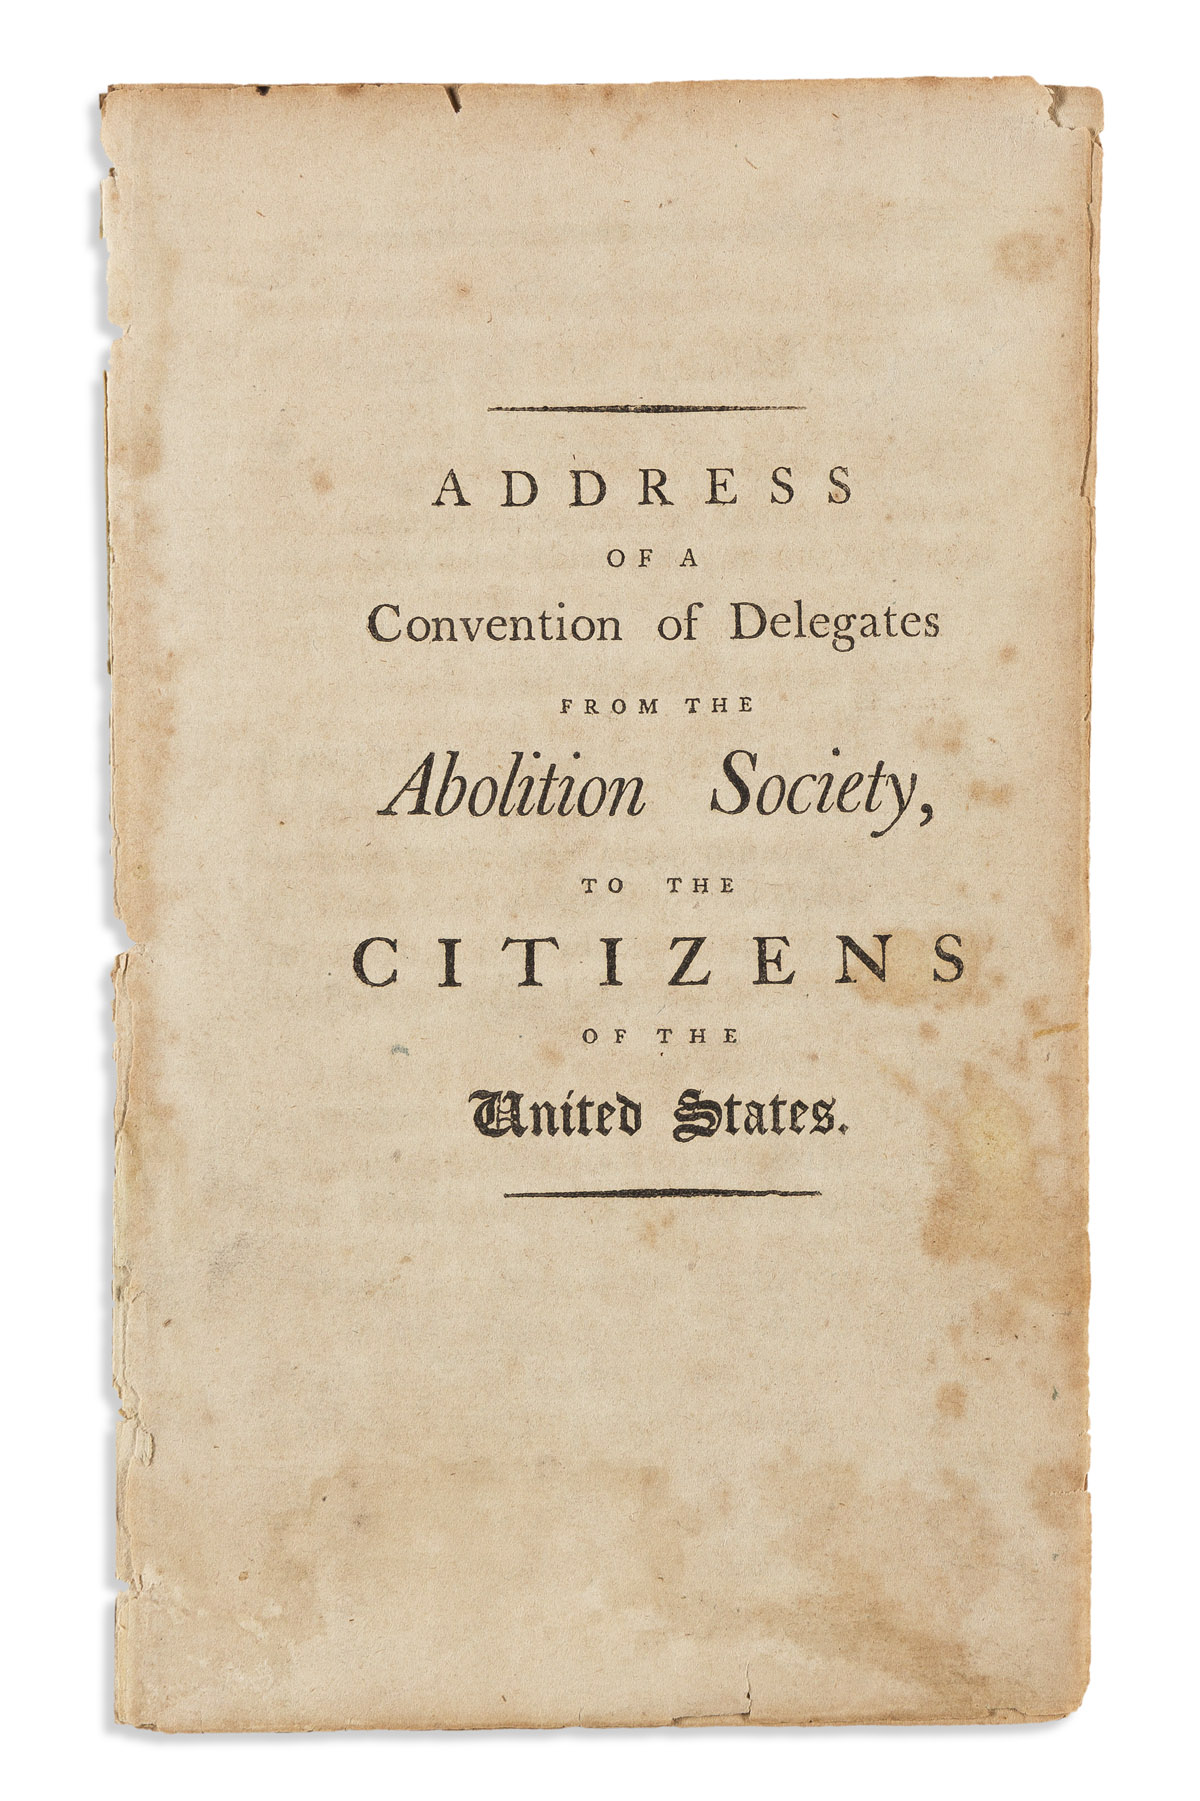 (SLAVERY & ABOLITION.) Address of a Convention of Delegates from the Abolition Society, to the Citizens of the United States.